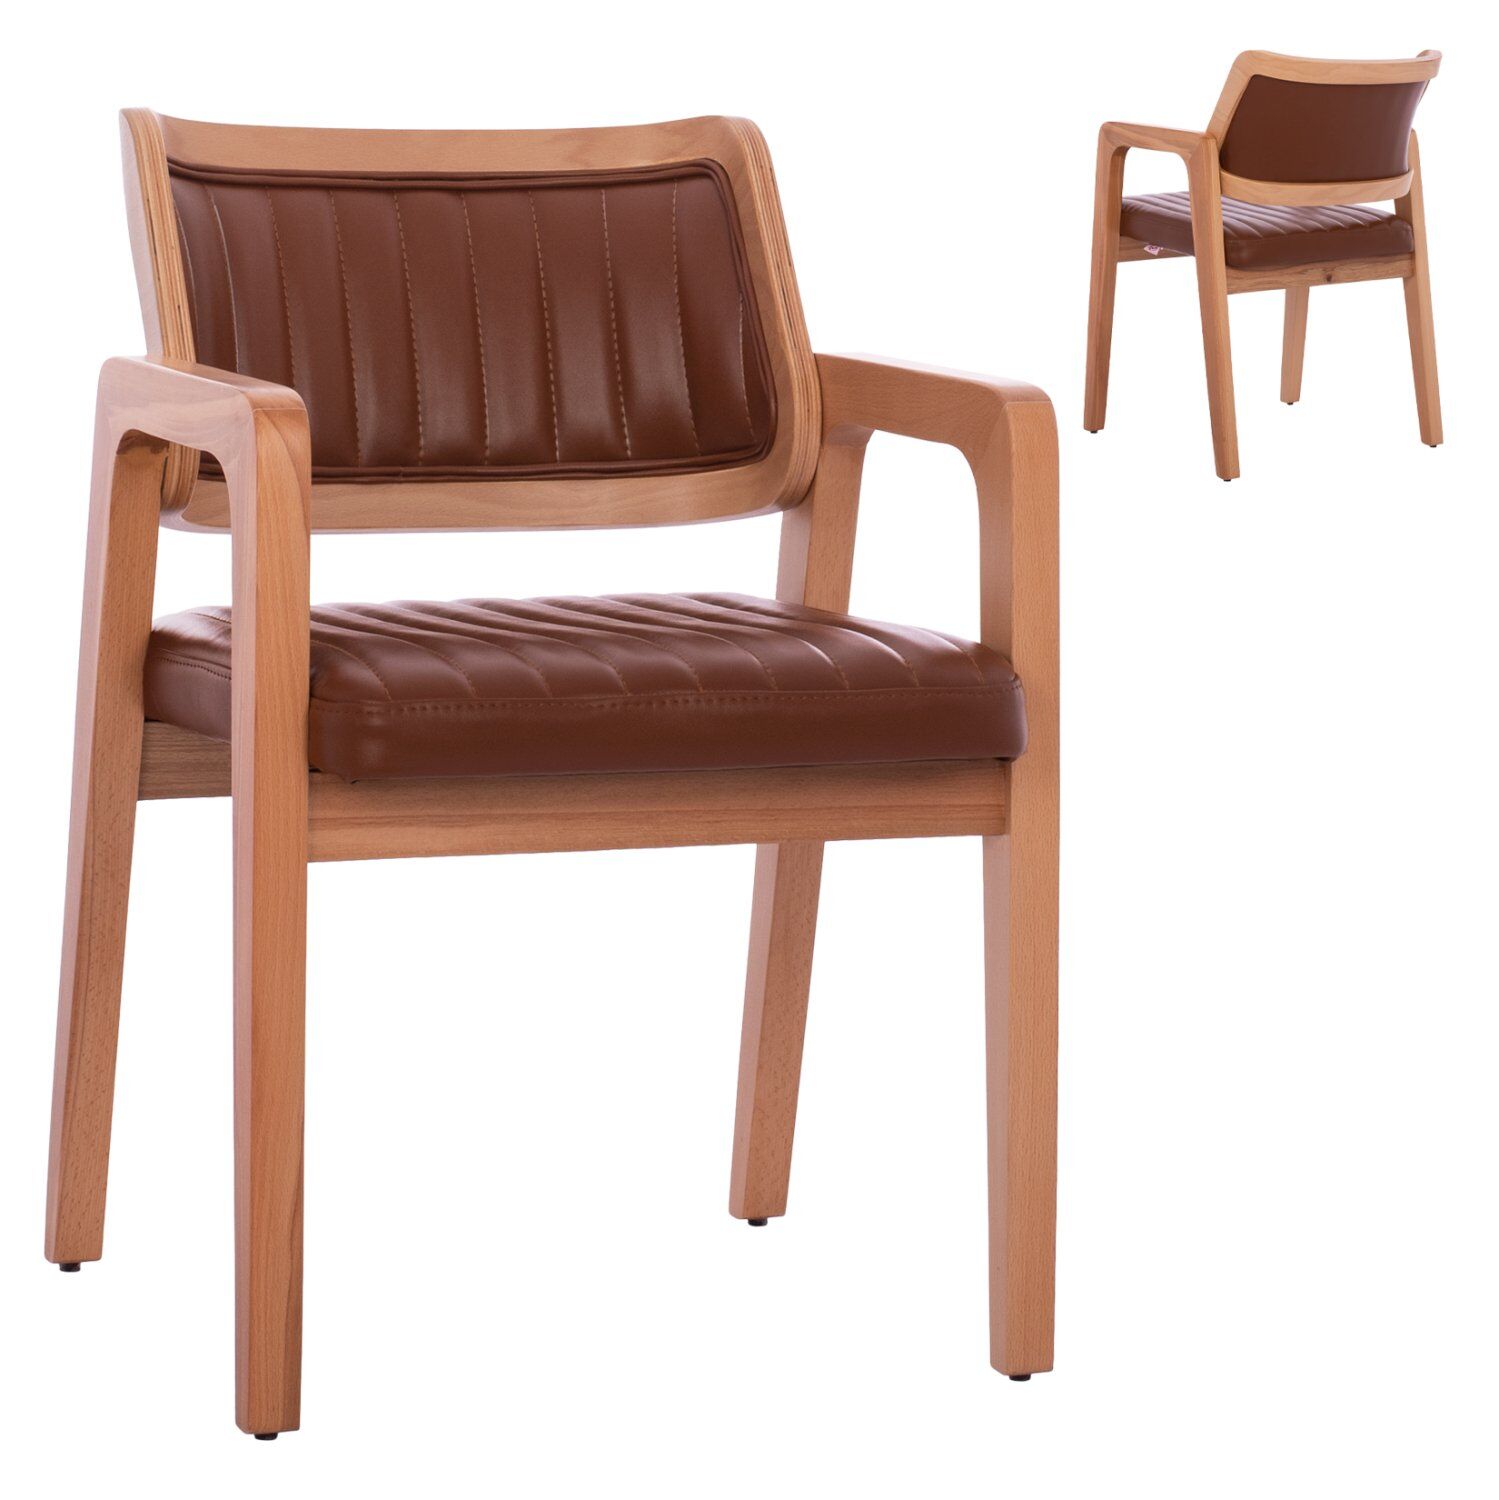 ARMCHAIR “LUCERO” HM9279.43 TAMPA PU LEATHER & NATURAL WOODEN FRAME 56X65X81H CM.